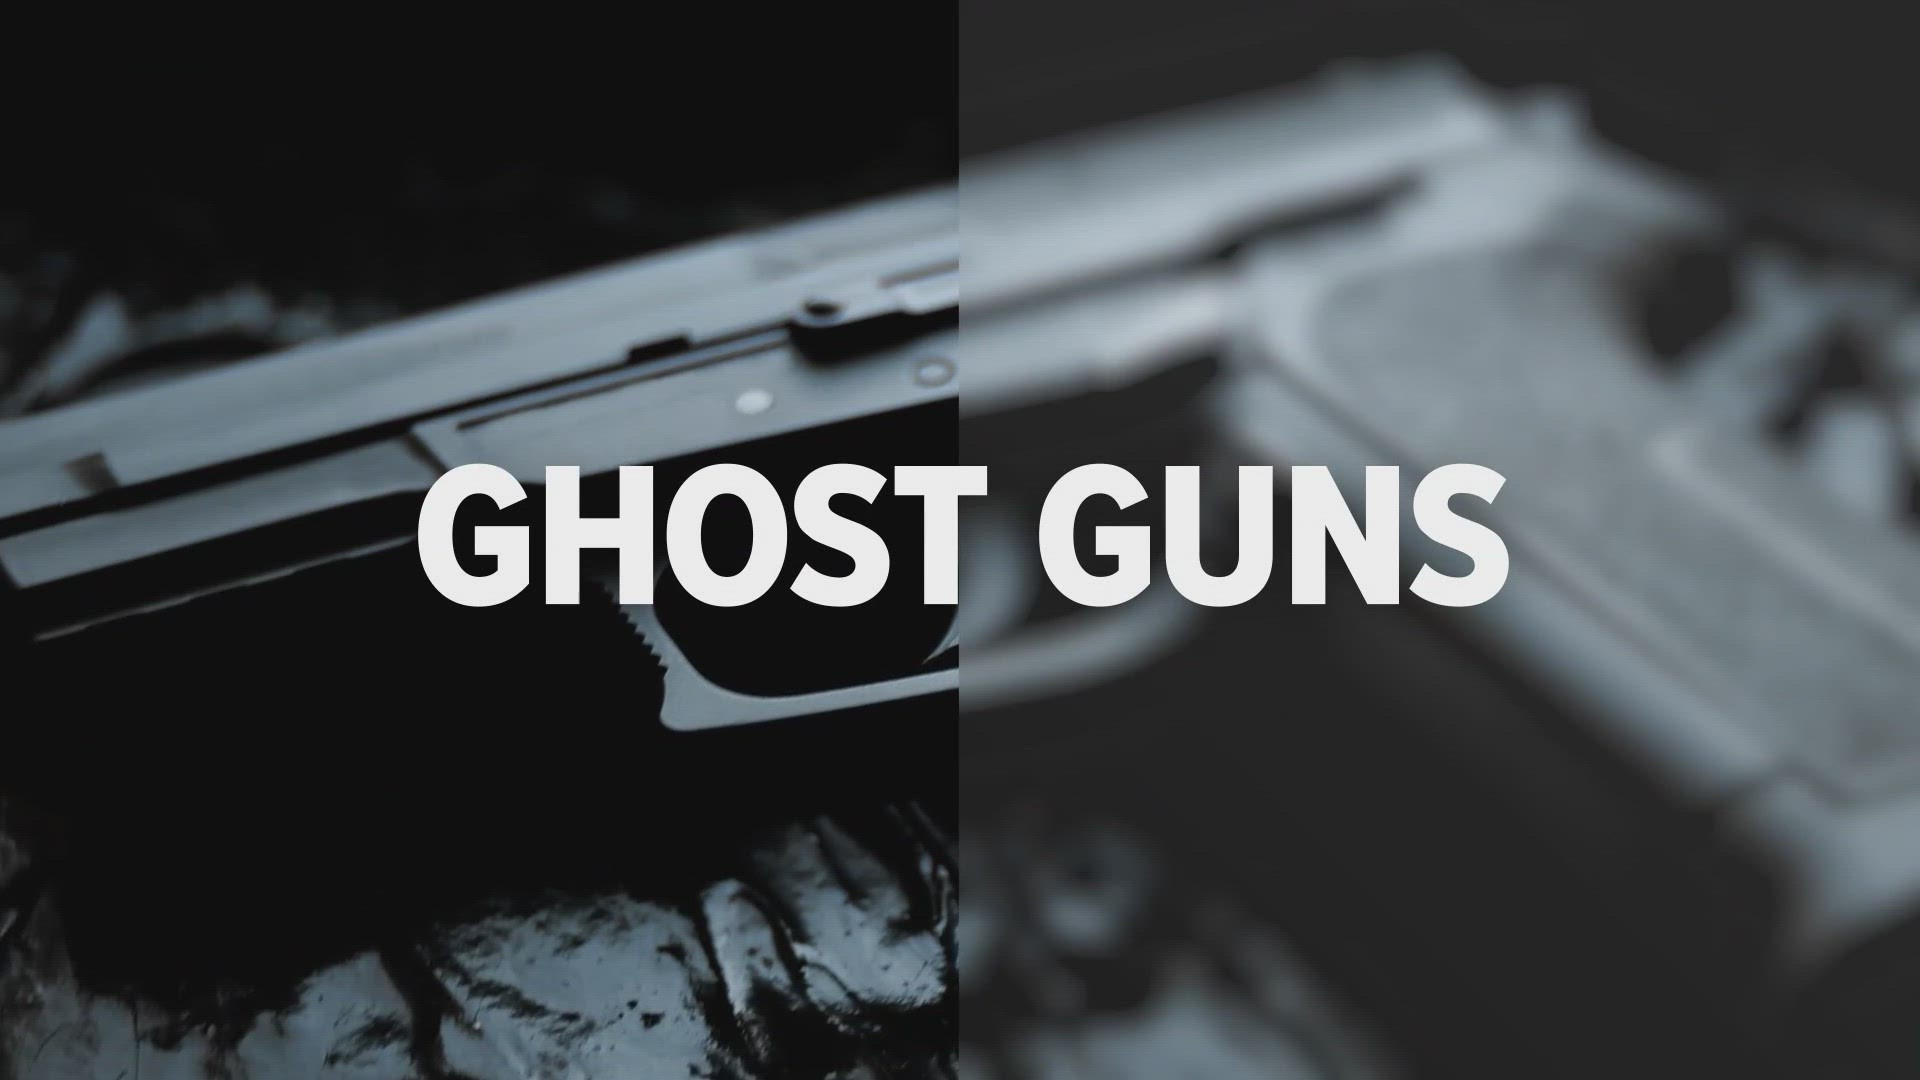 The largest manufacturer of so-called "ghost gun" parts is agreeing to stop selling them in Maryland.